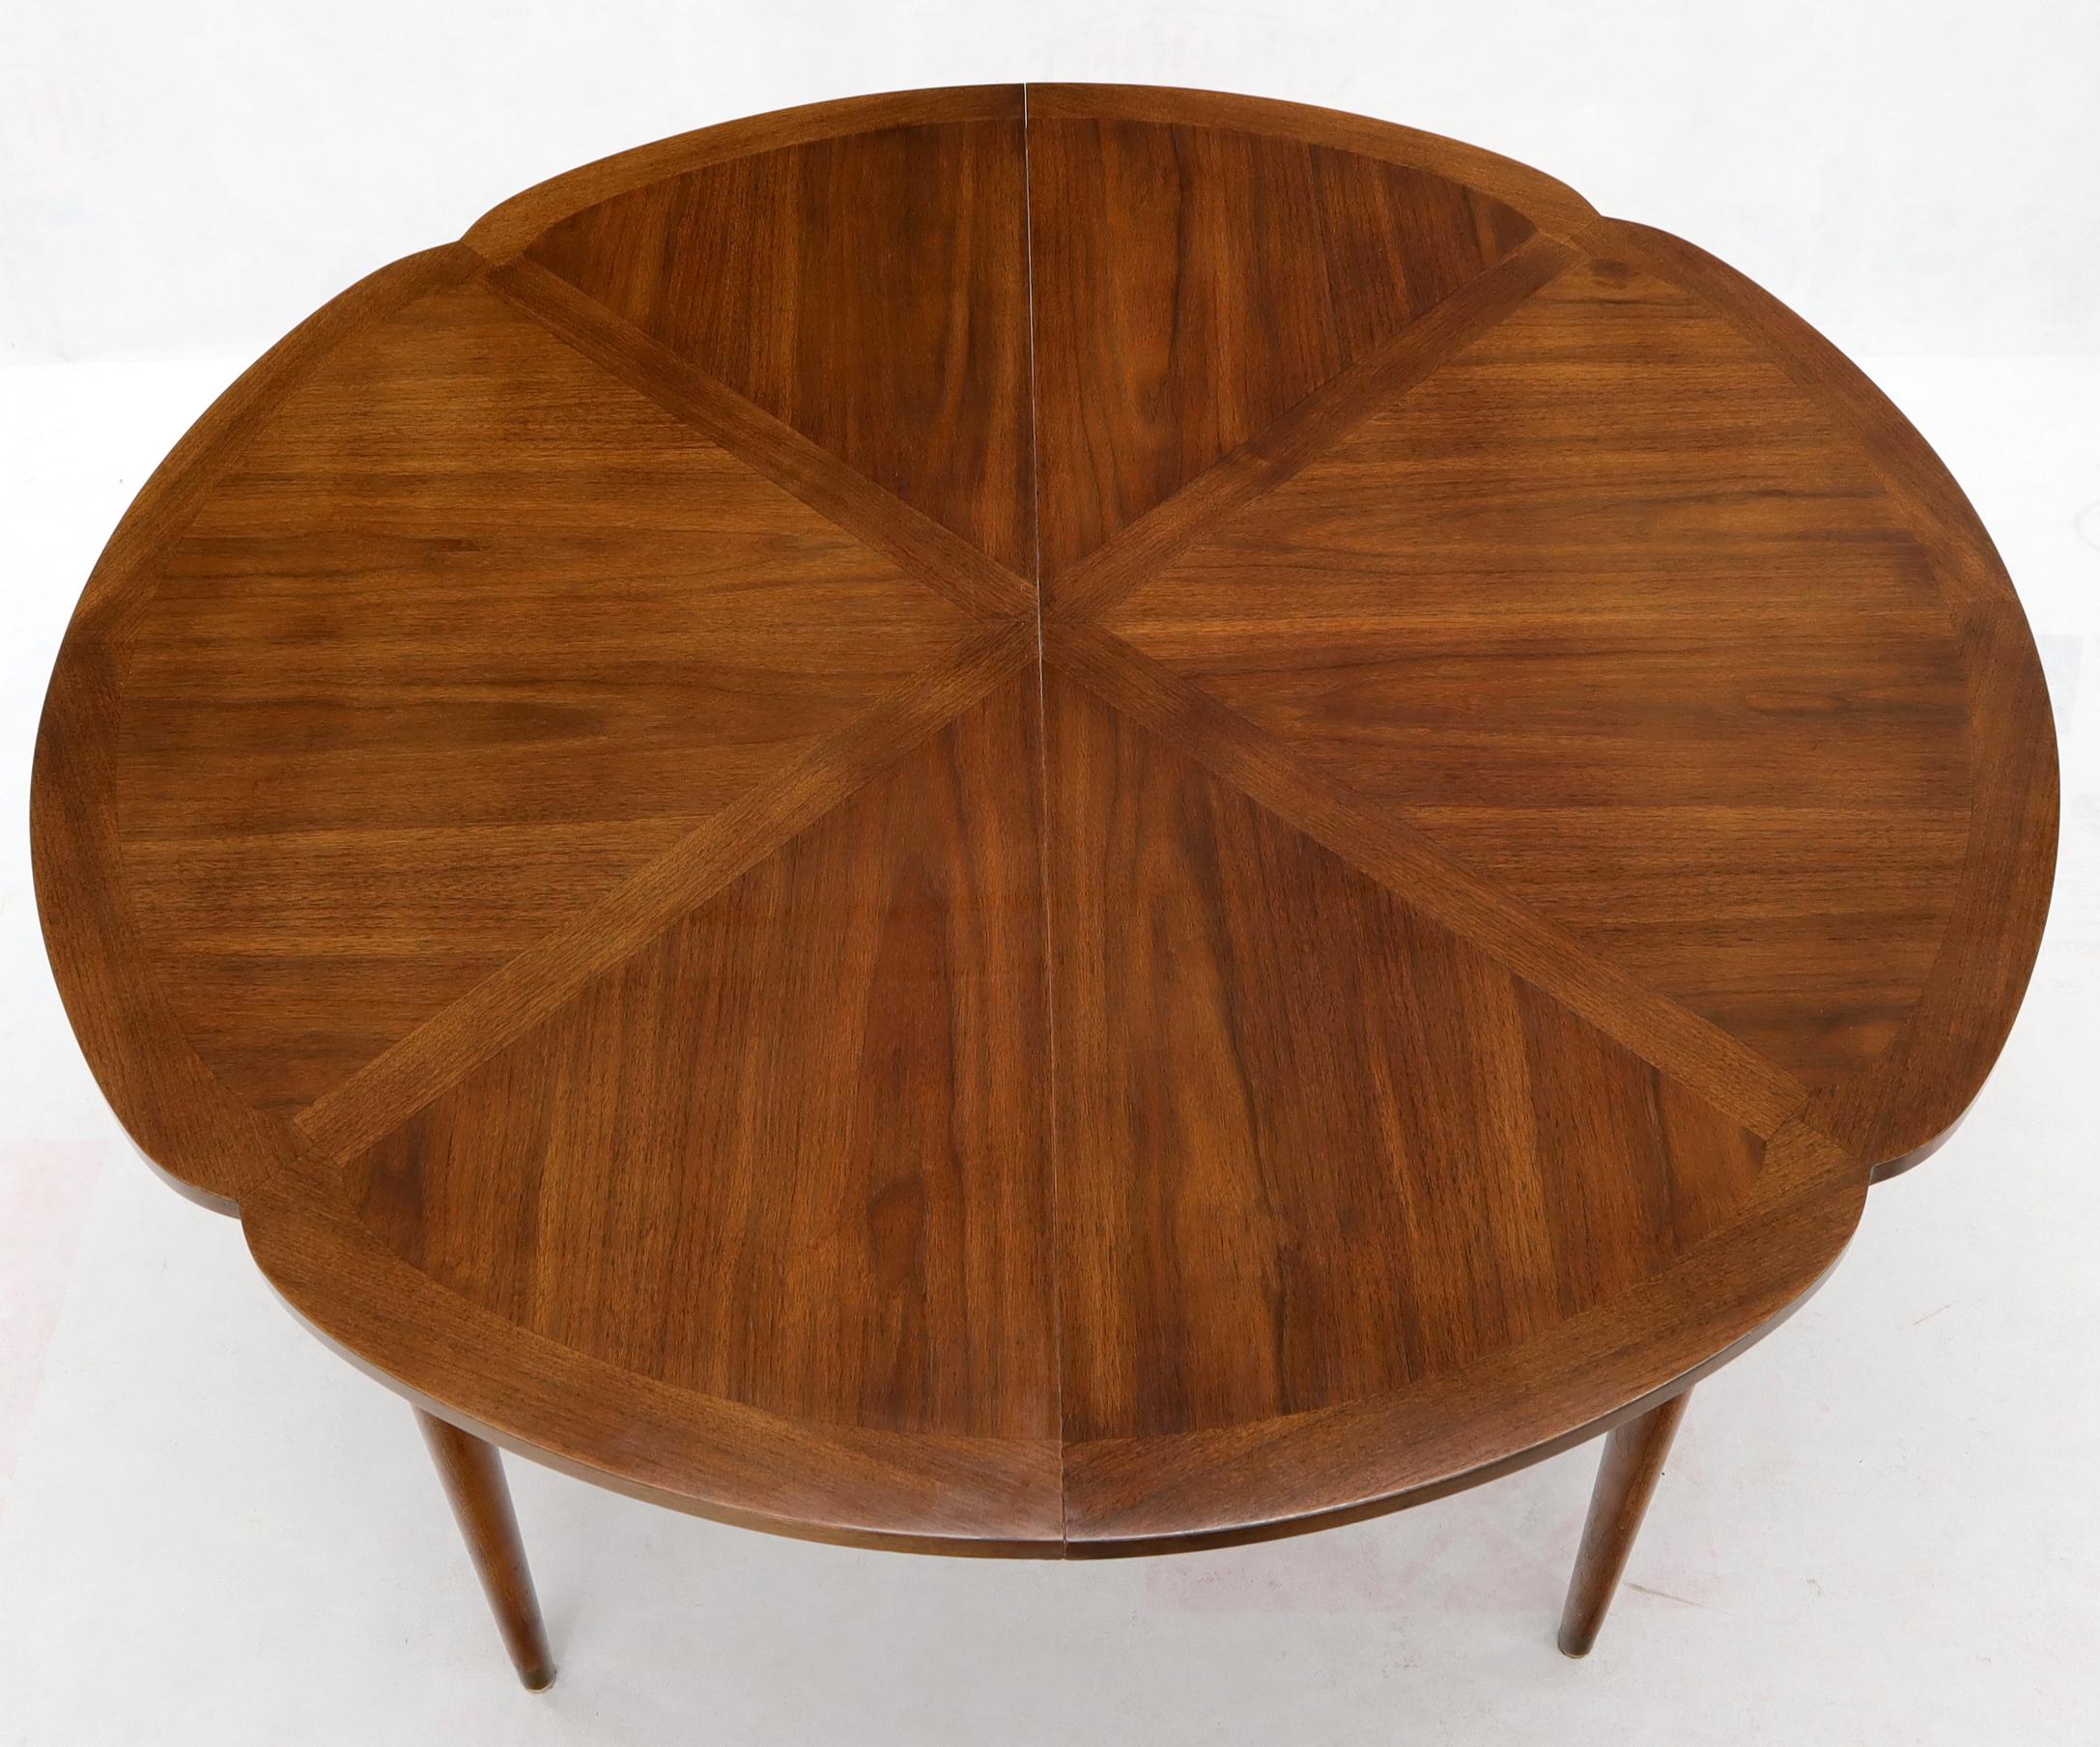 Lacquered Walnut Daisy Shape Top Dining Table with Two Extension Boards Leaves